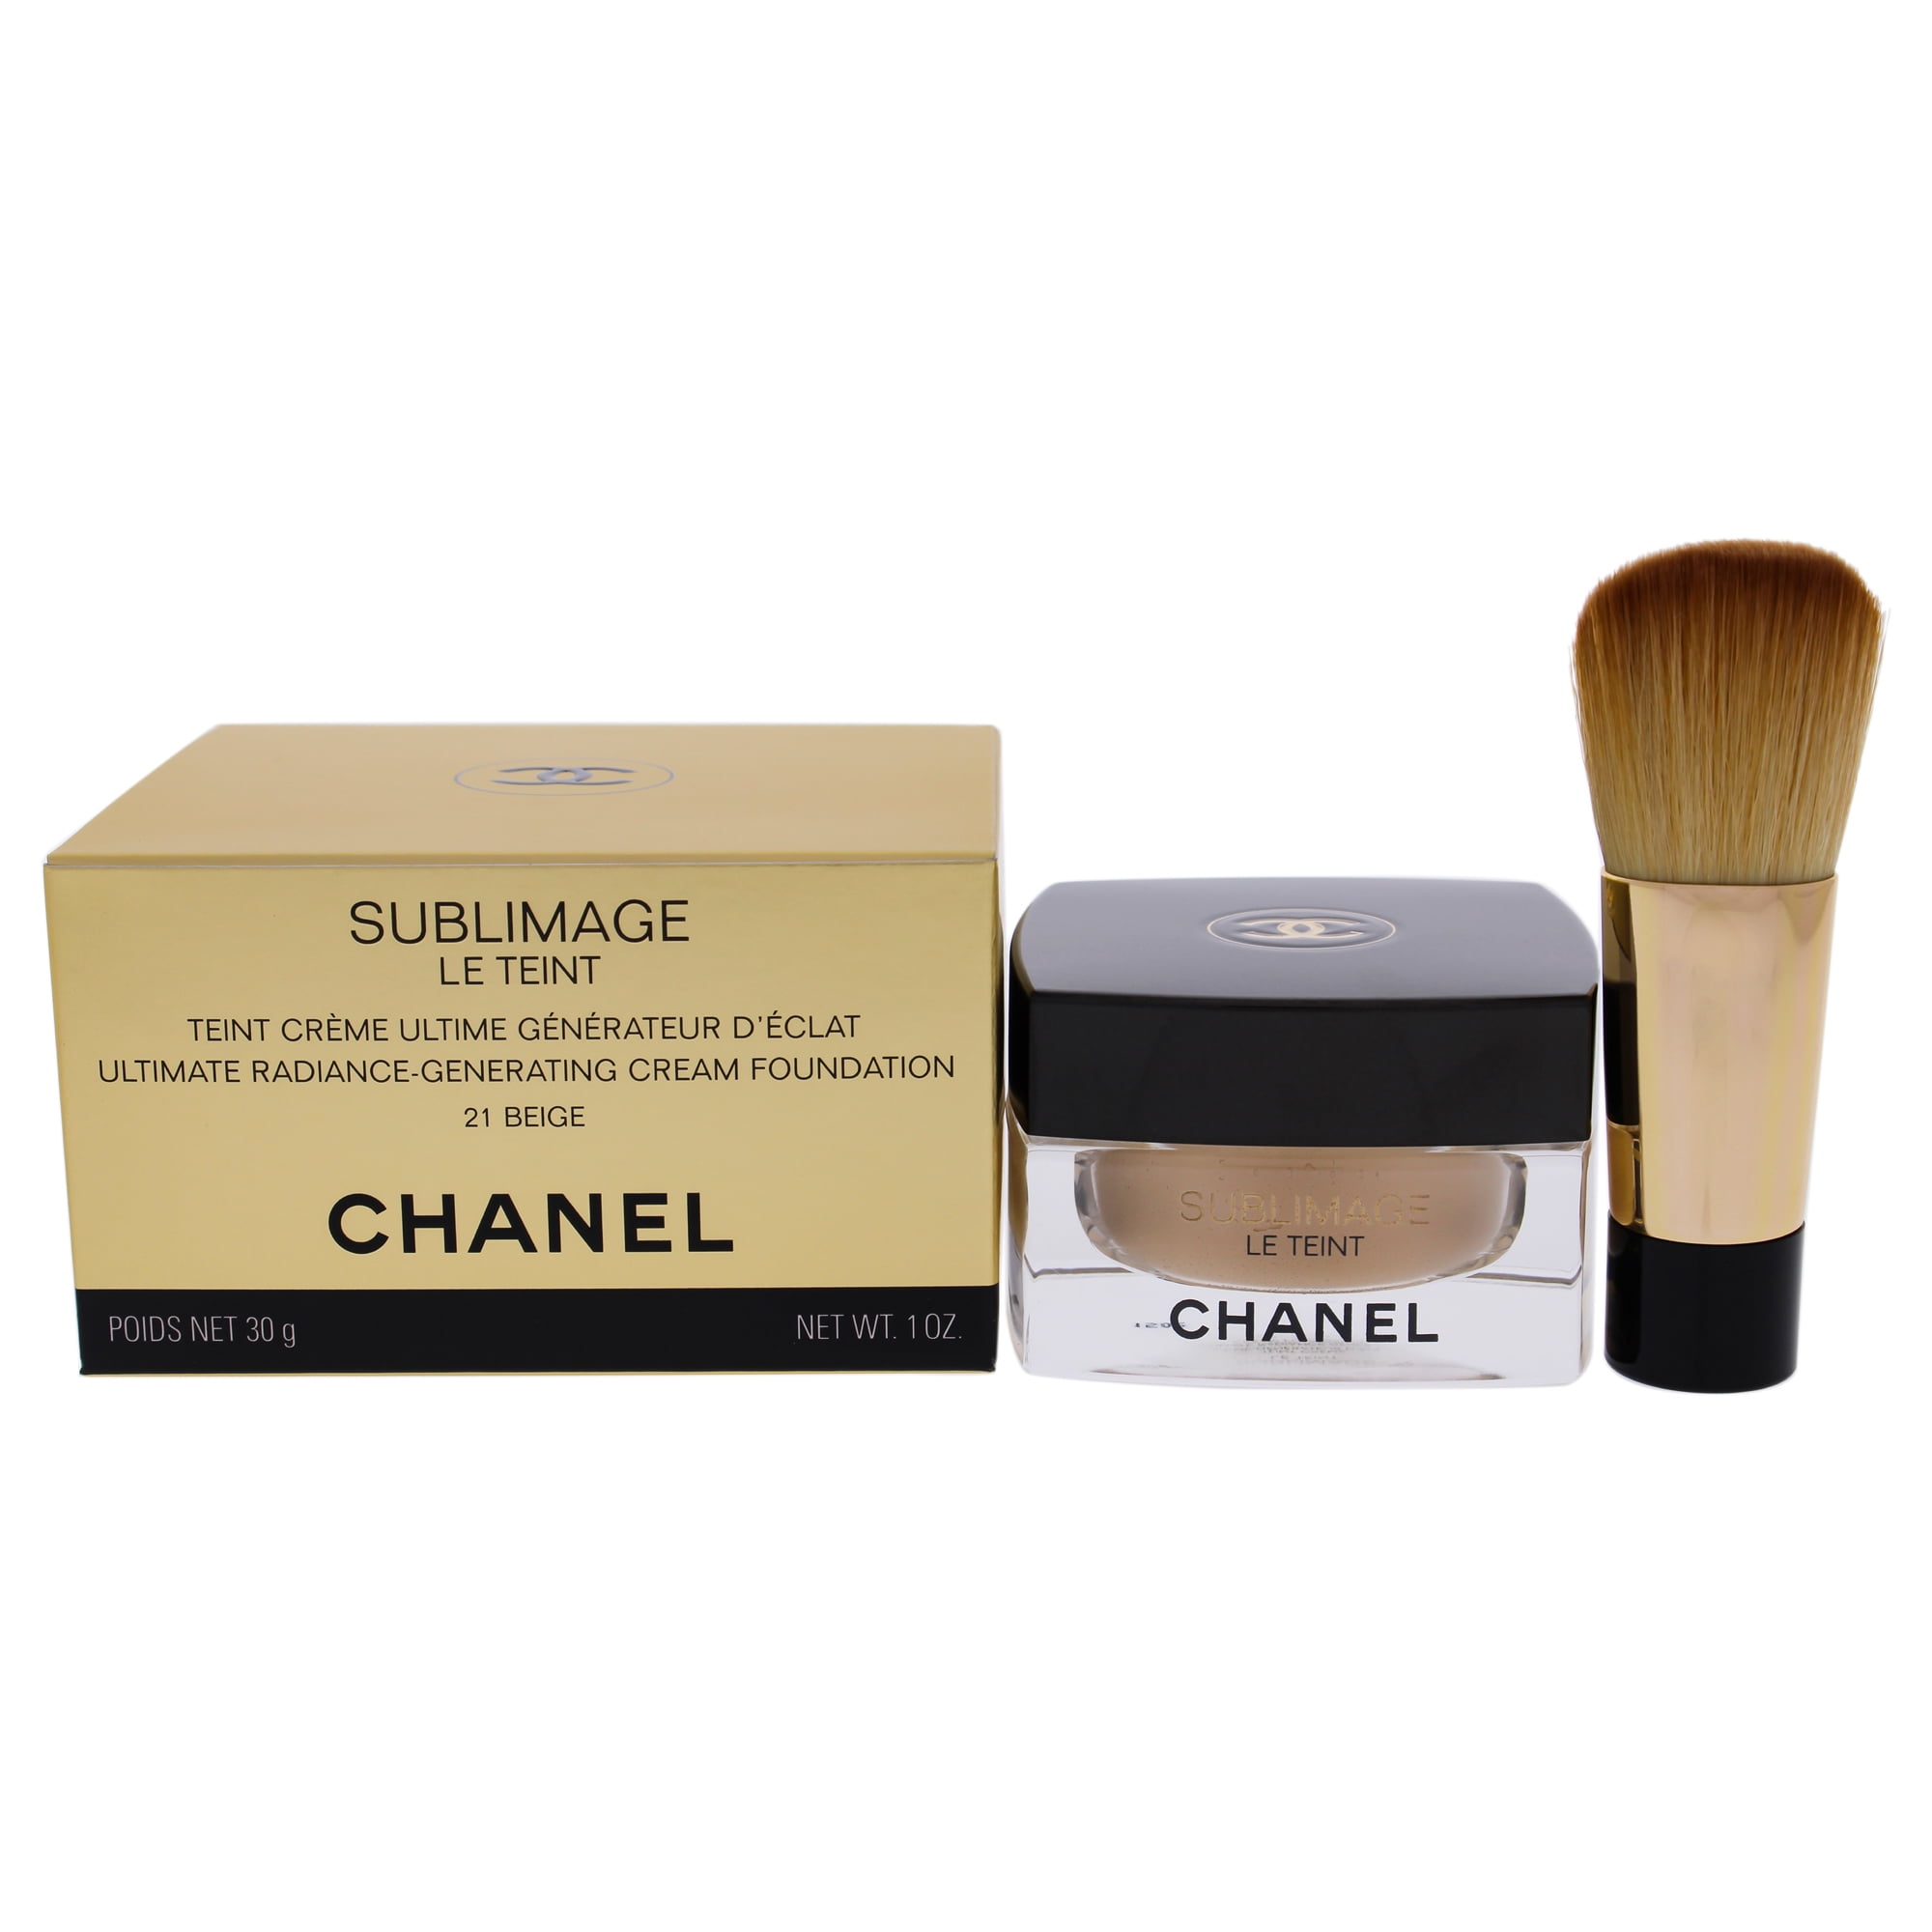 CHANEL Sublimage Le Teint Ultimate Radiance-Generating Cream Foundation  Shade No.20 Beige 5ml Travel, Beauty & Personal Care, Face, Makeup on  Carousell